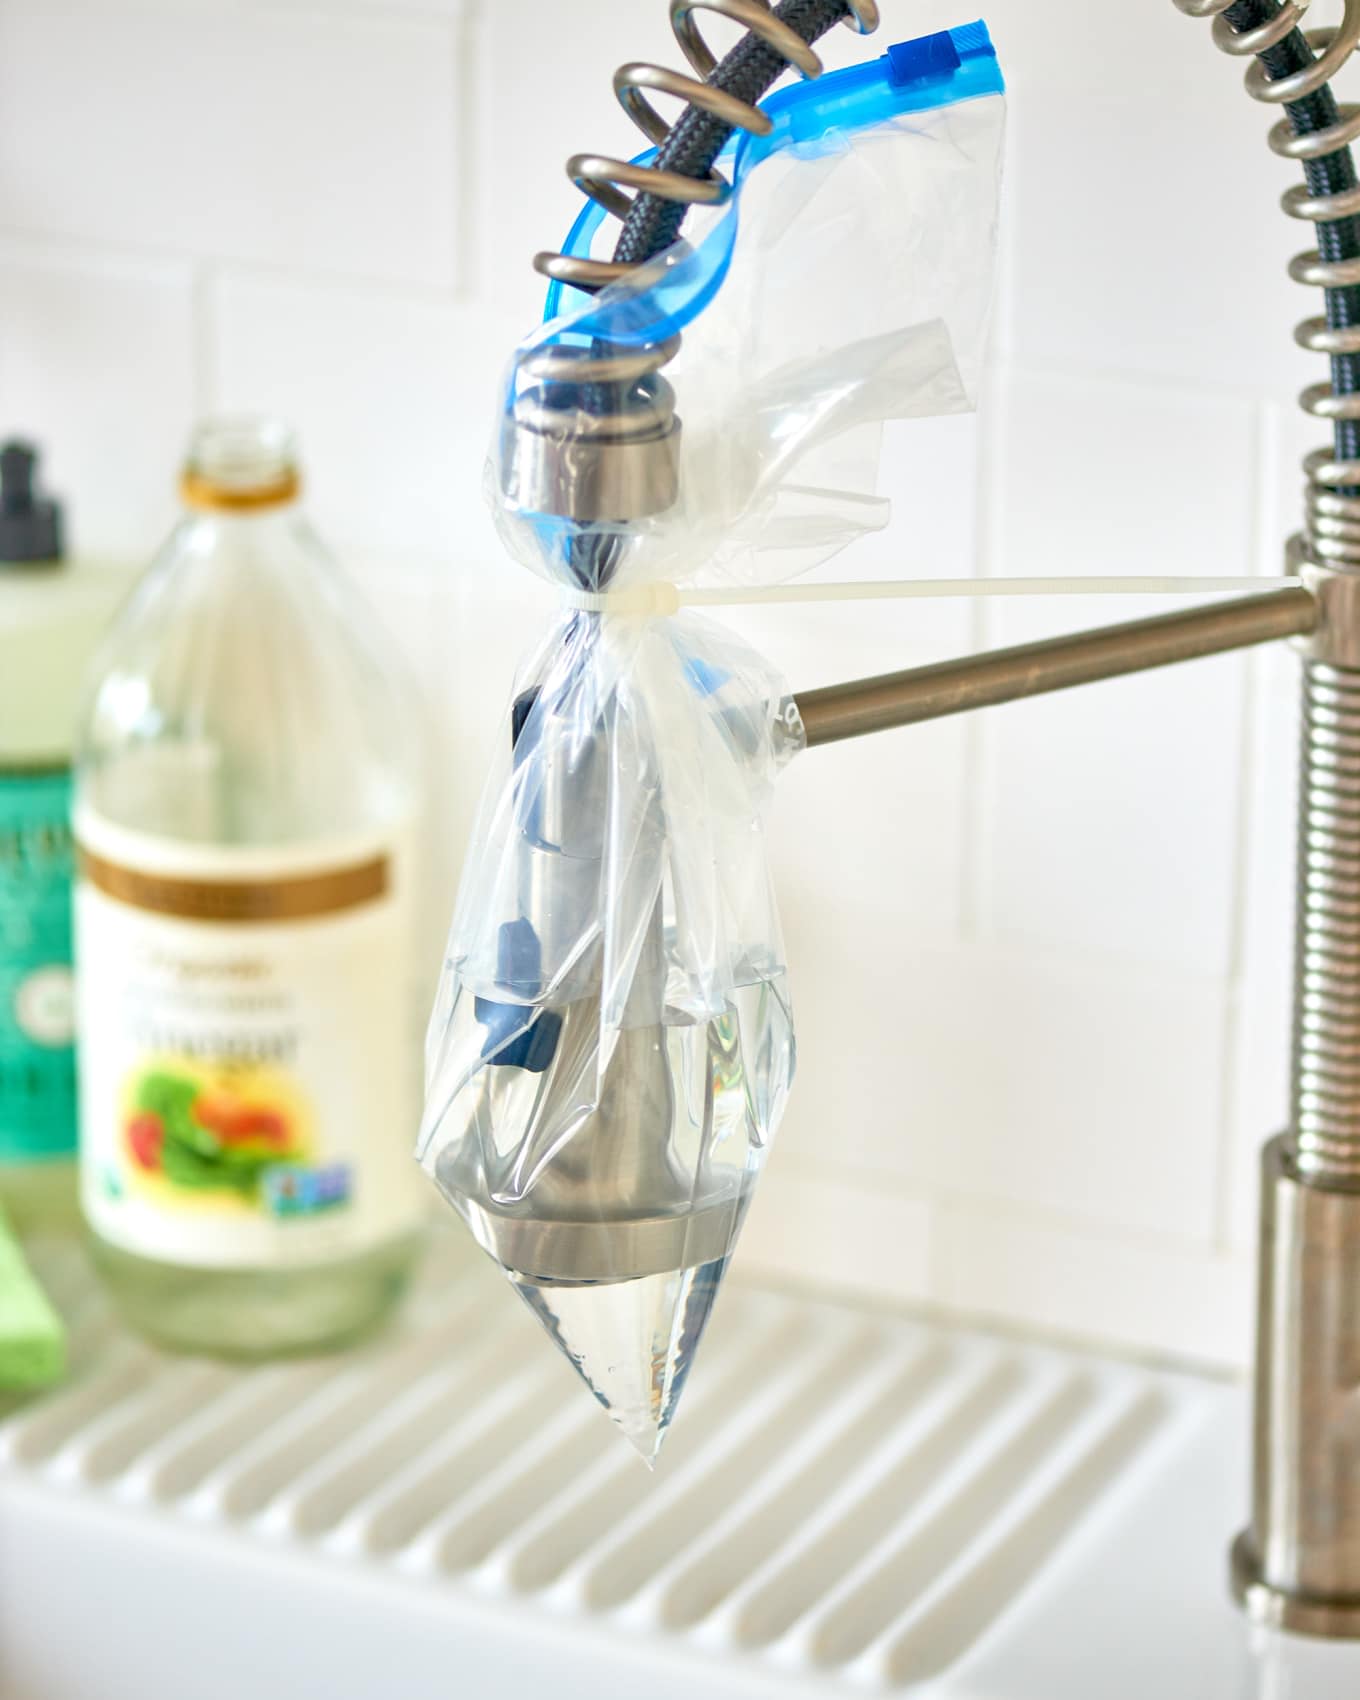 How To Unclog A Faucet How to Clean A Sink, Drain, Faucet and Garbage Disposal | Kitchn